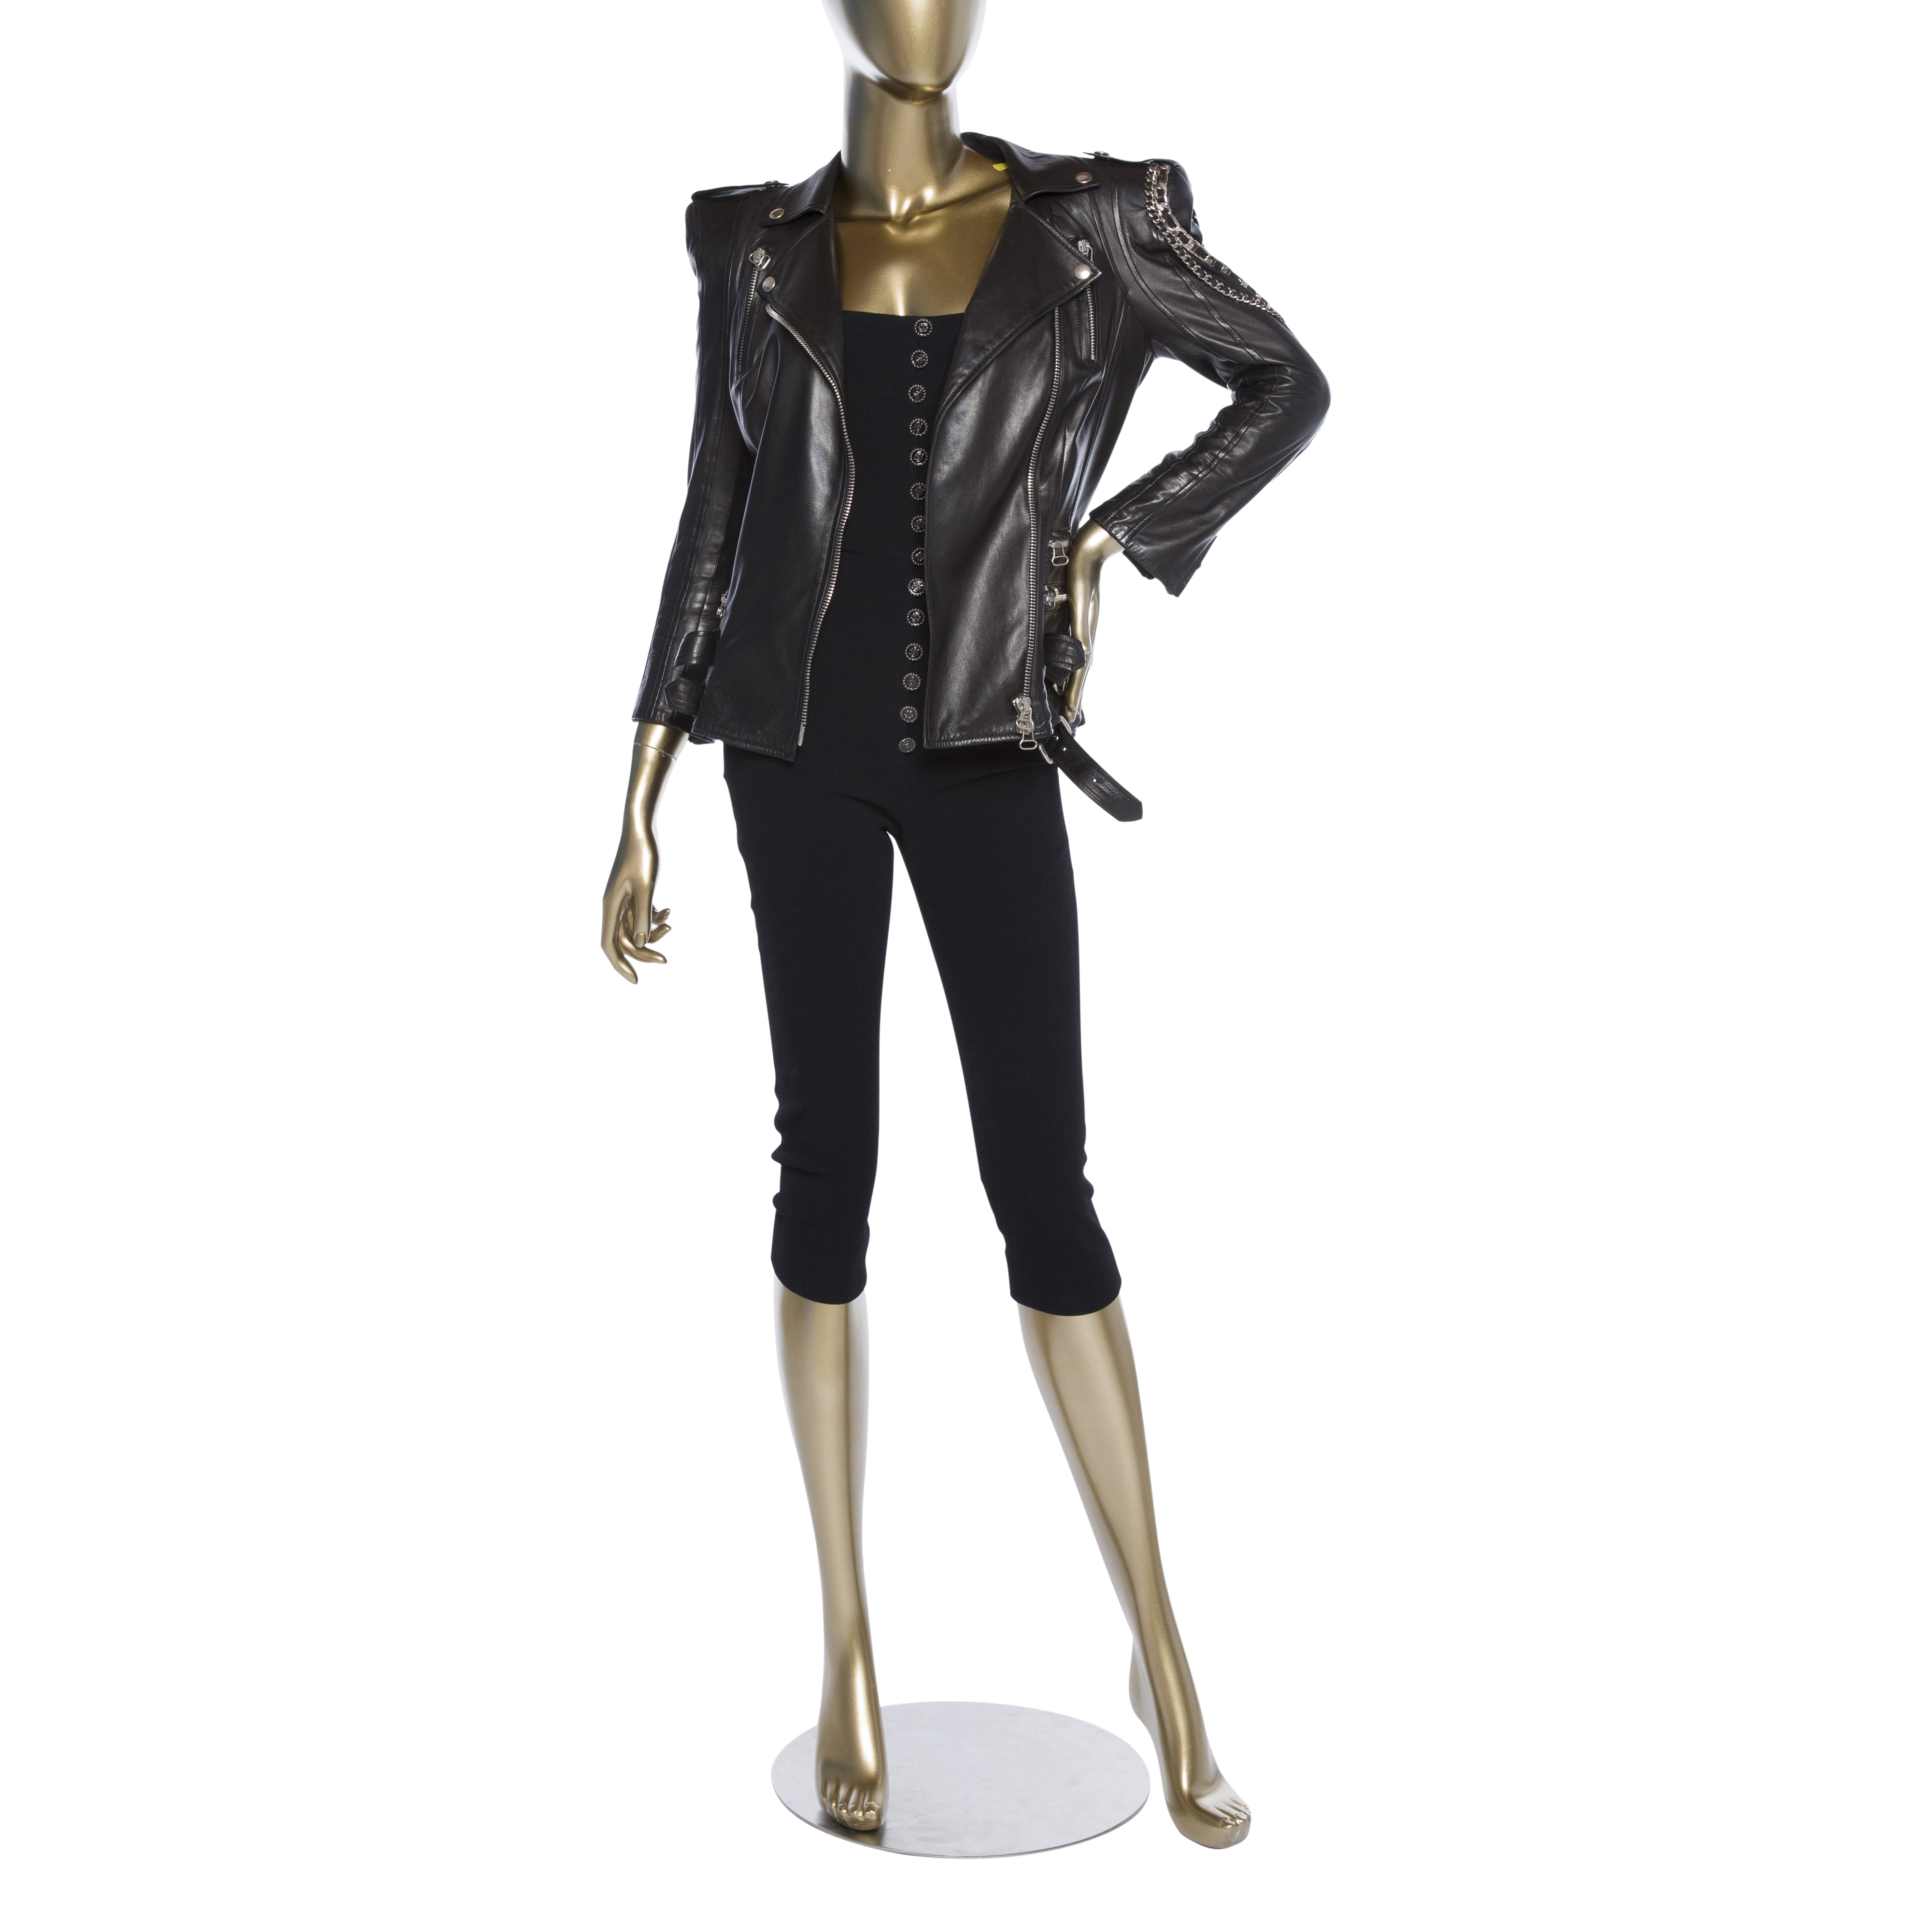 Balmain Leather Moto Jacket with Chain Detail - Janet Mandell